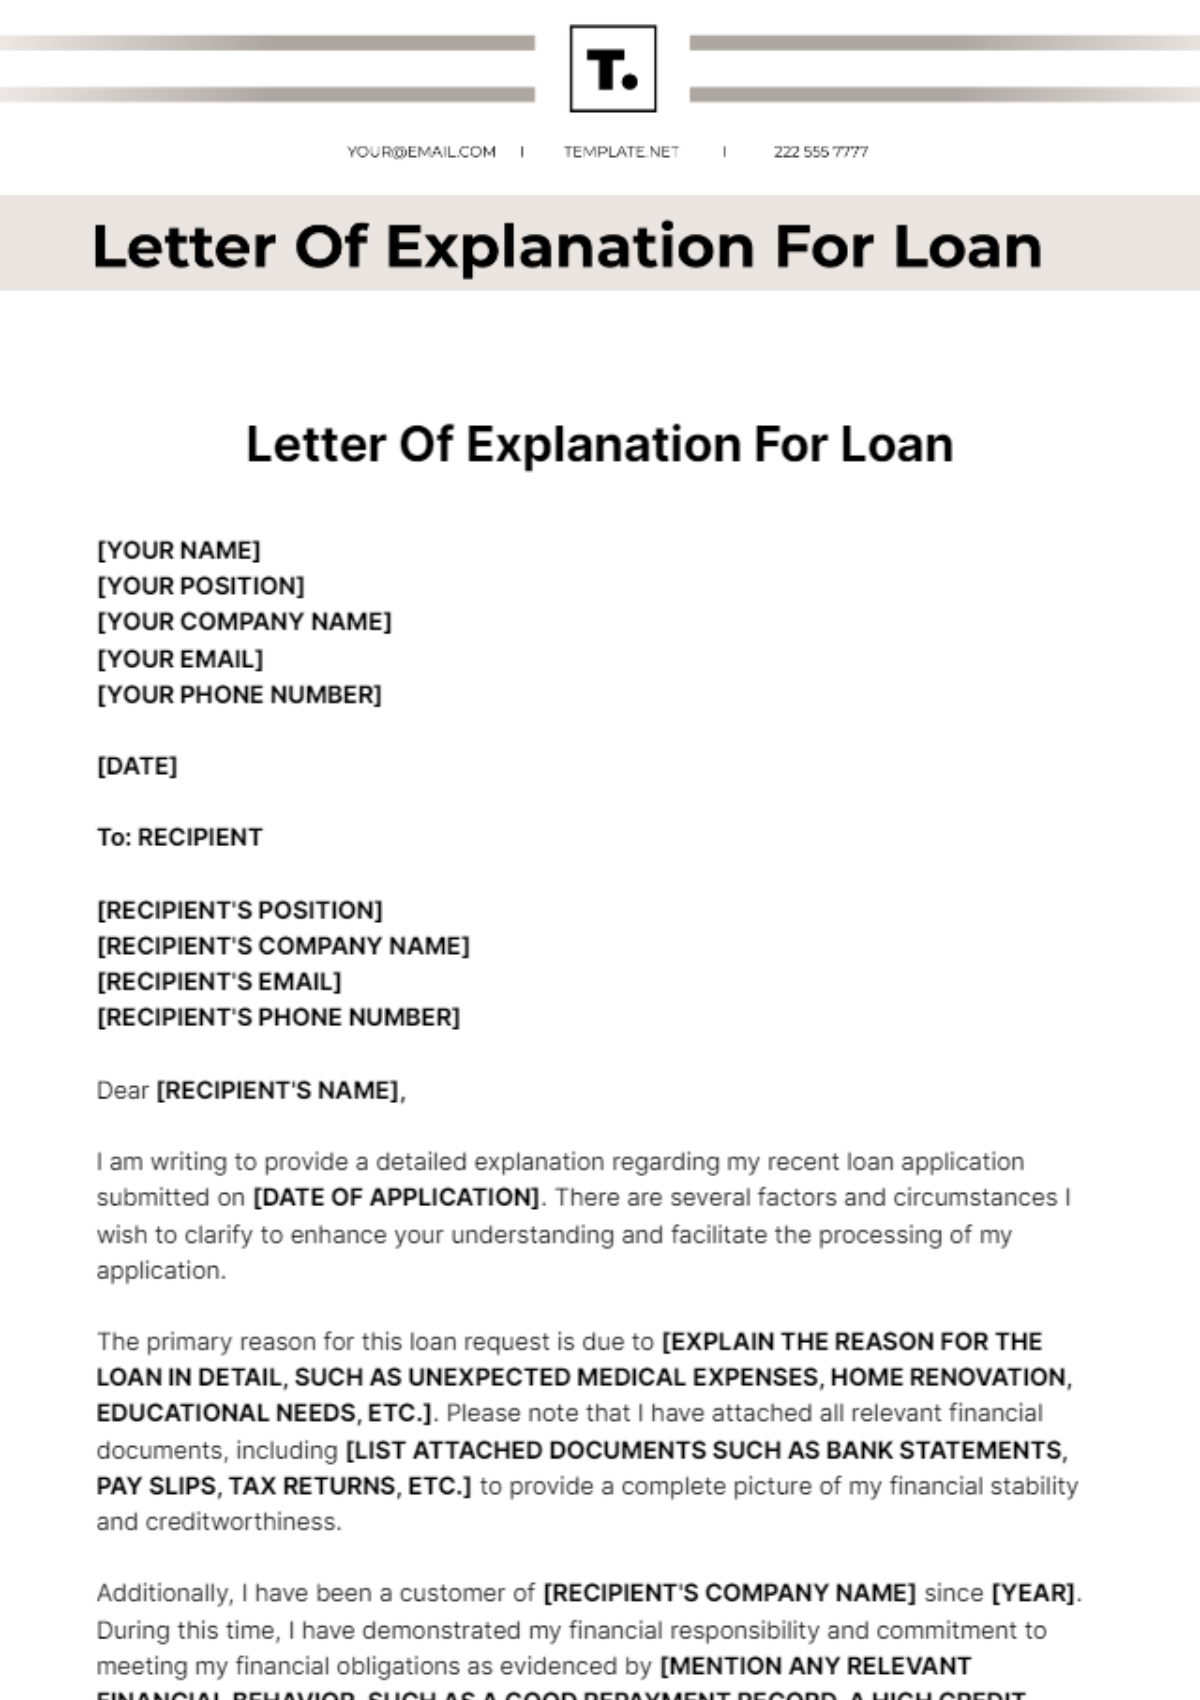 Letter Of Explanation For Loan Template